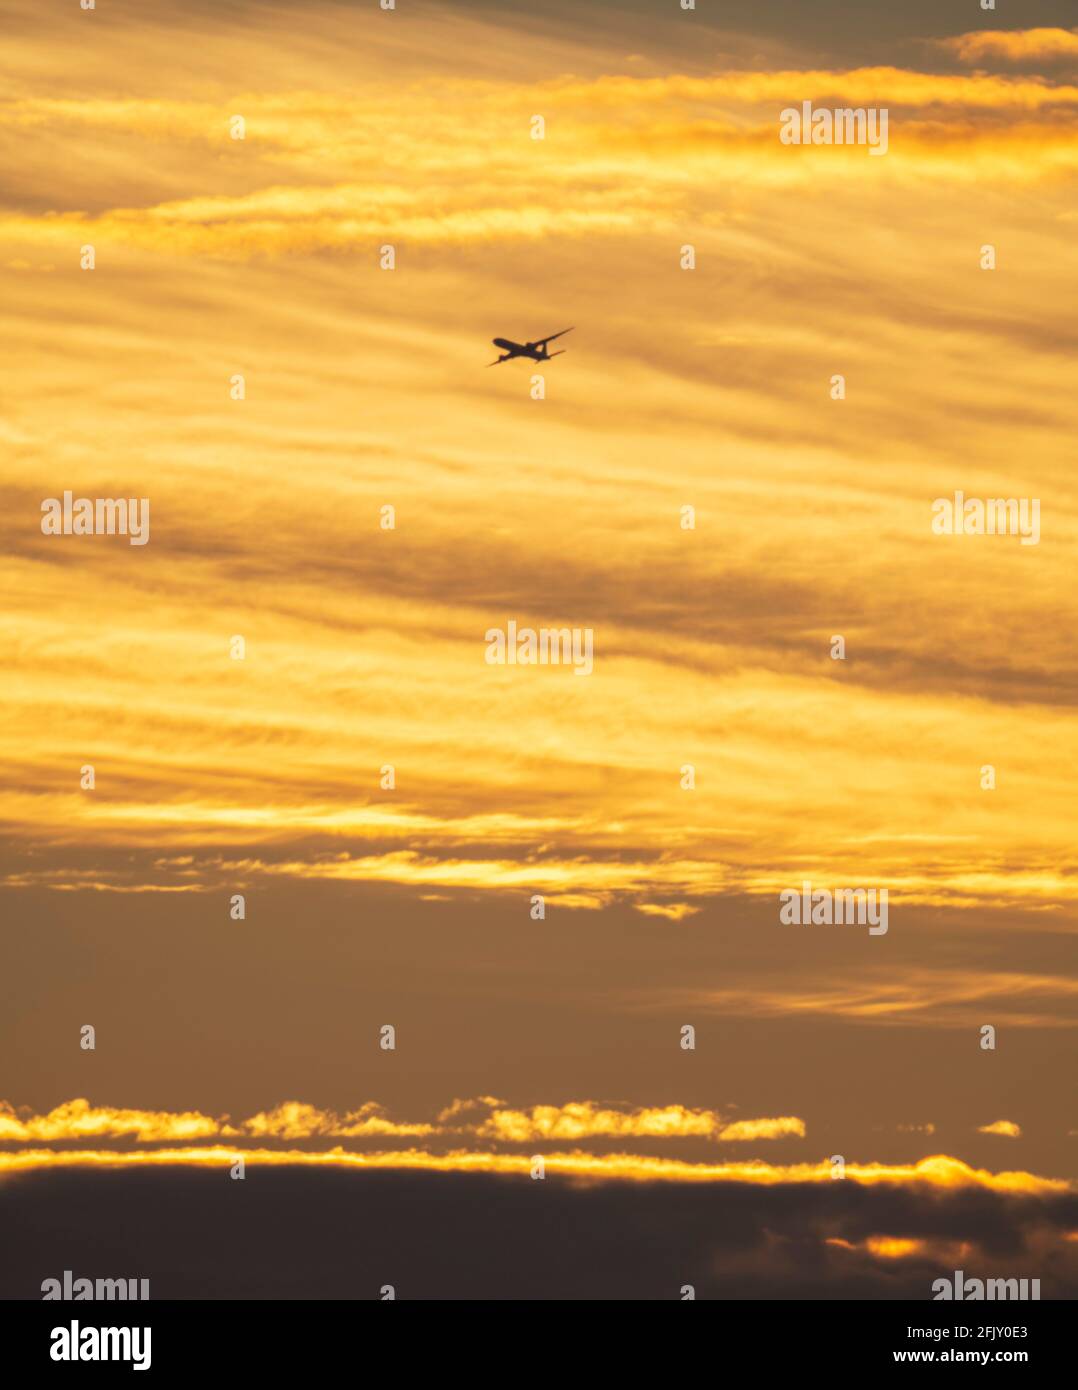 Wimbledon, London, UK. 27 April 2021. An early arrival to London Heathrow airport begins the descent against a colourful backdrop of early clouds at sunrise. Credit: Malcolm Park/Alamy Live News. Stock Photo